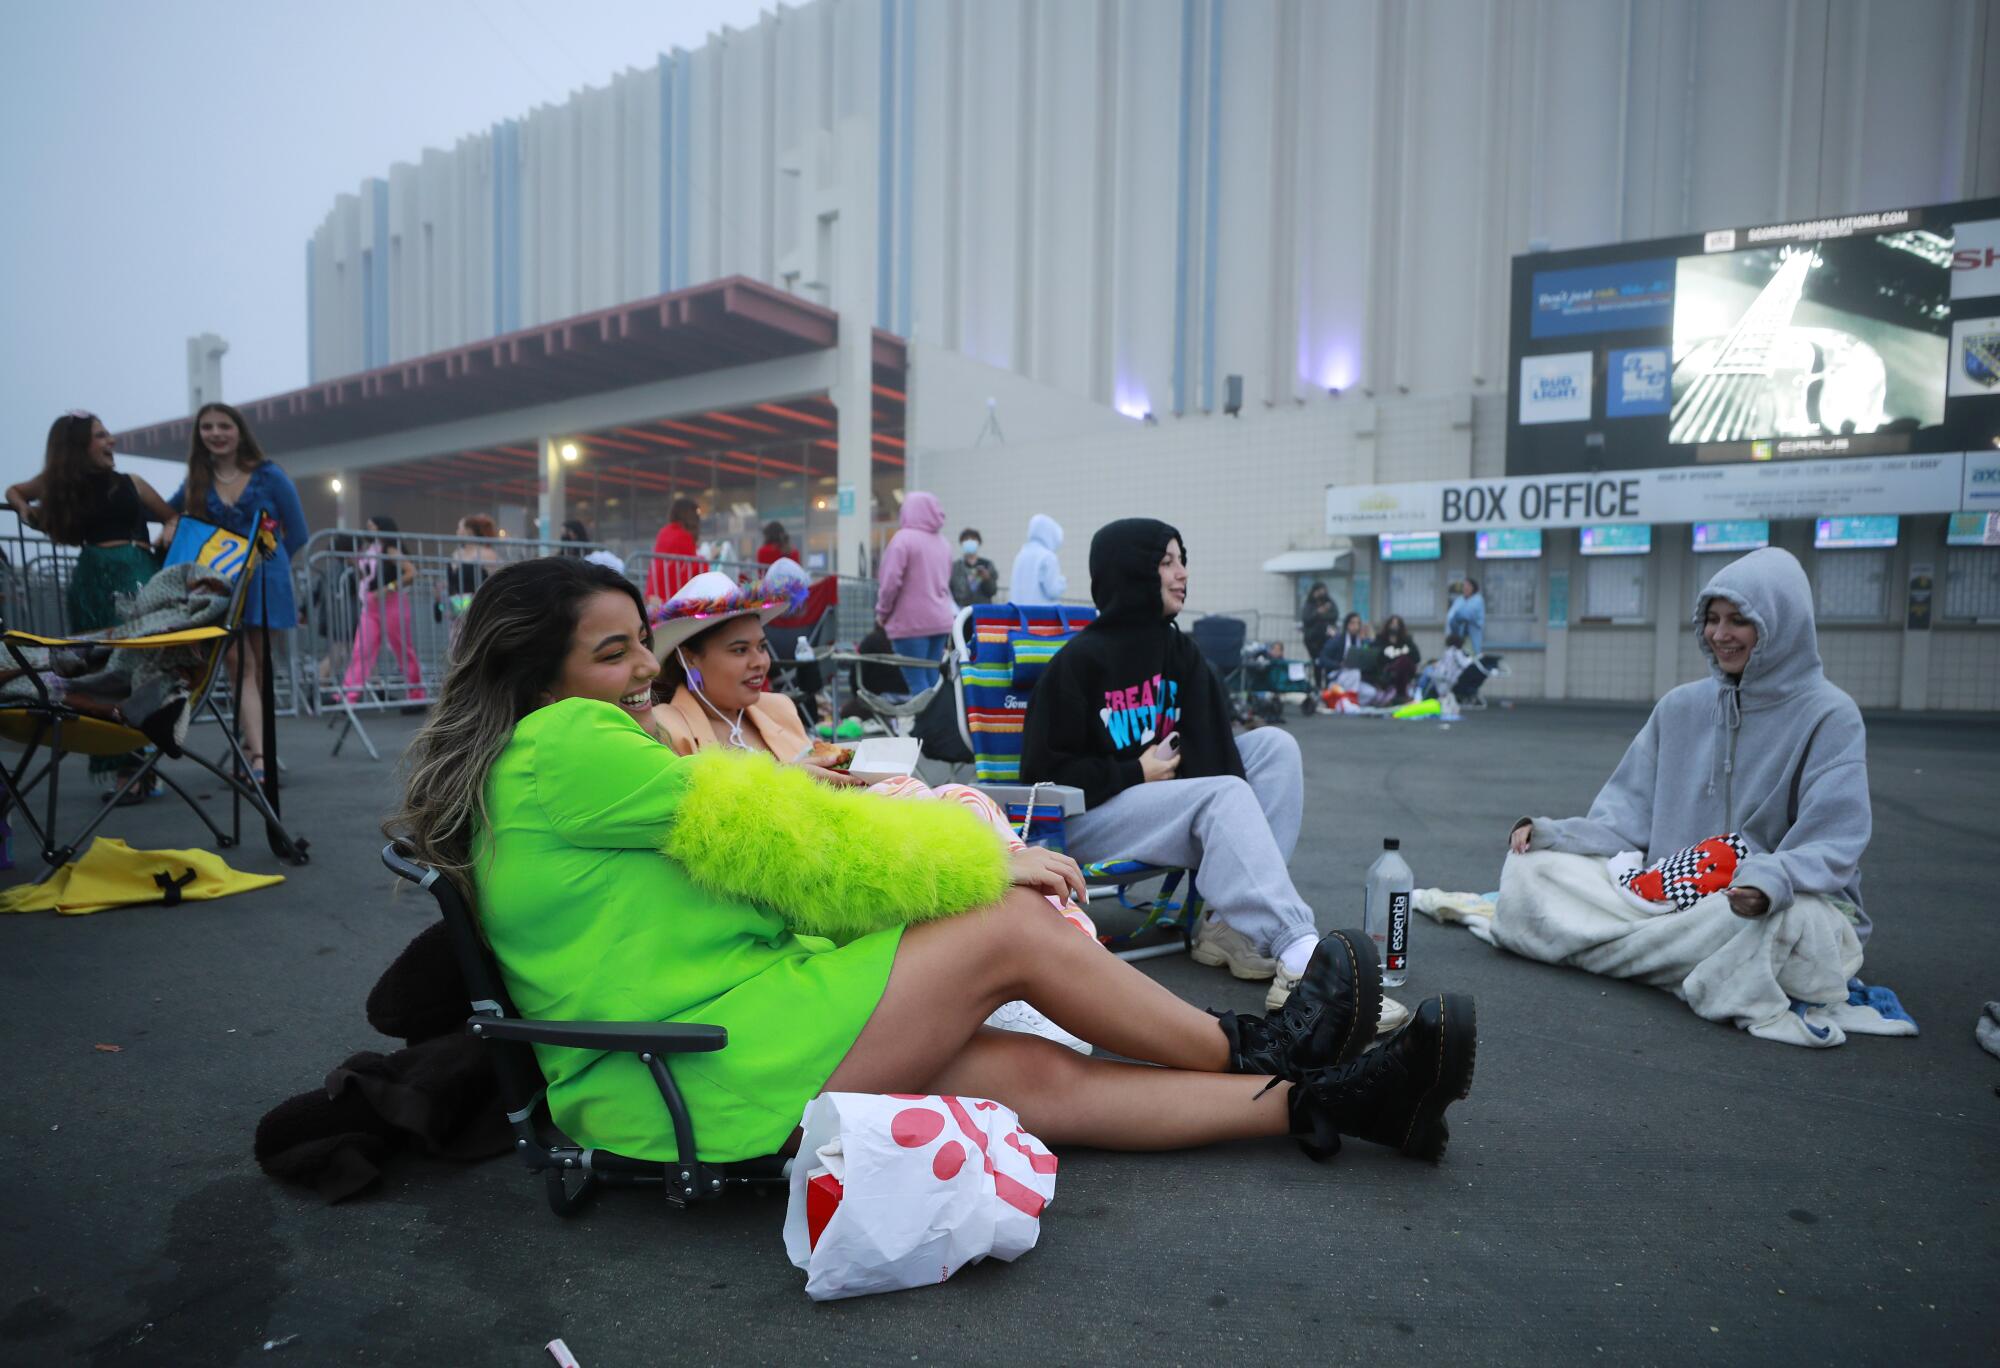 Fans wait in line hoping to get tickets to the sold-out Harry Styles concert. Some of them spent the night.